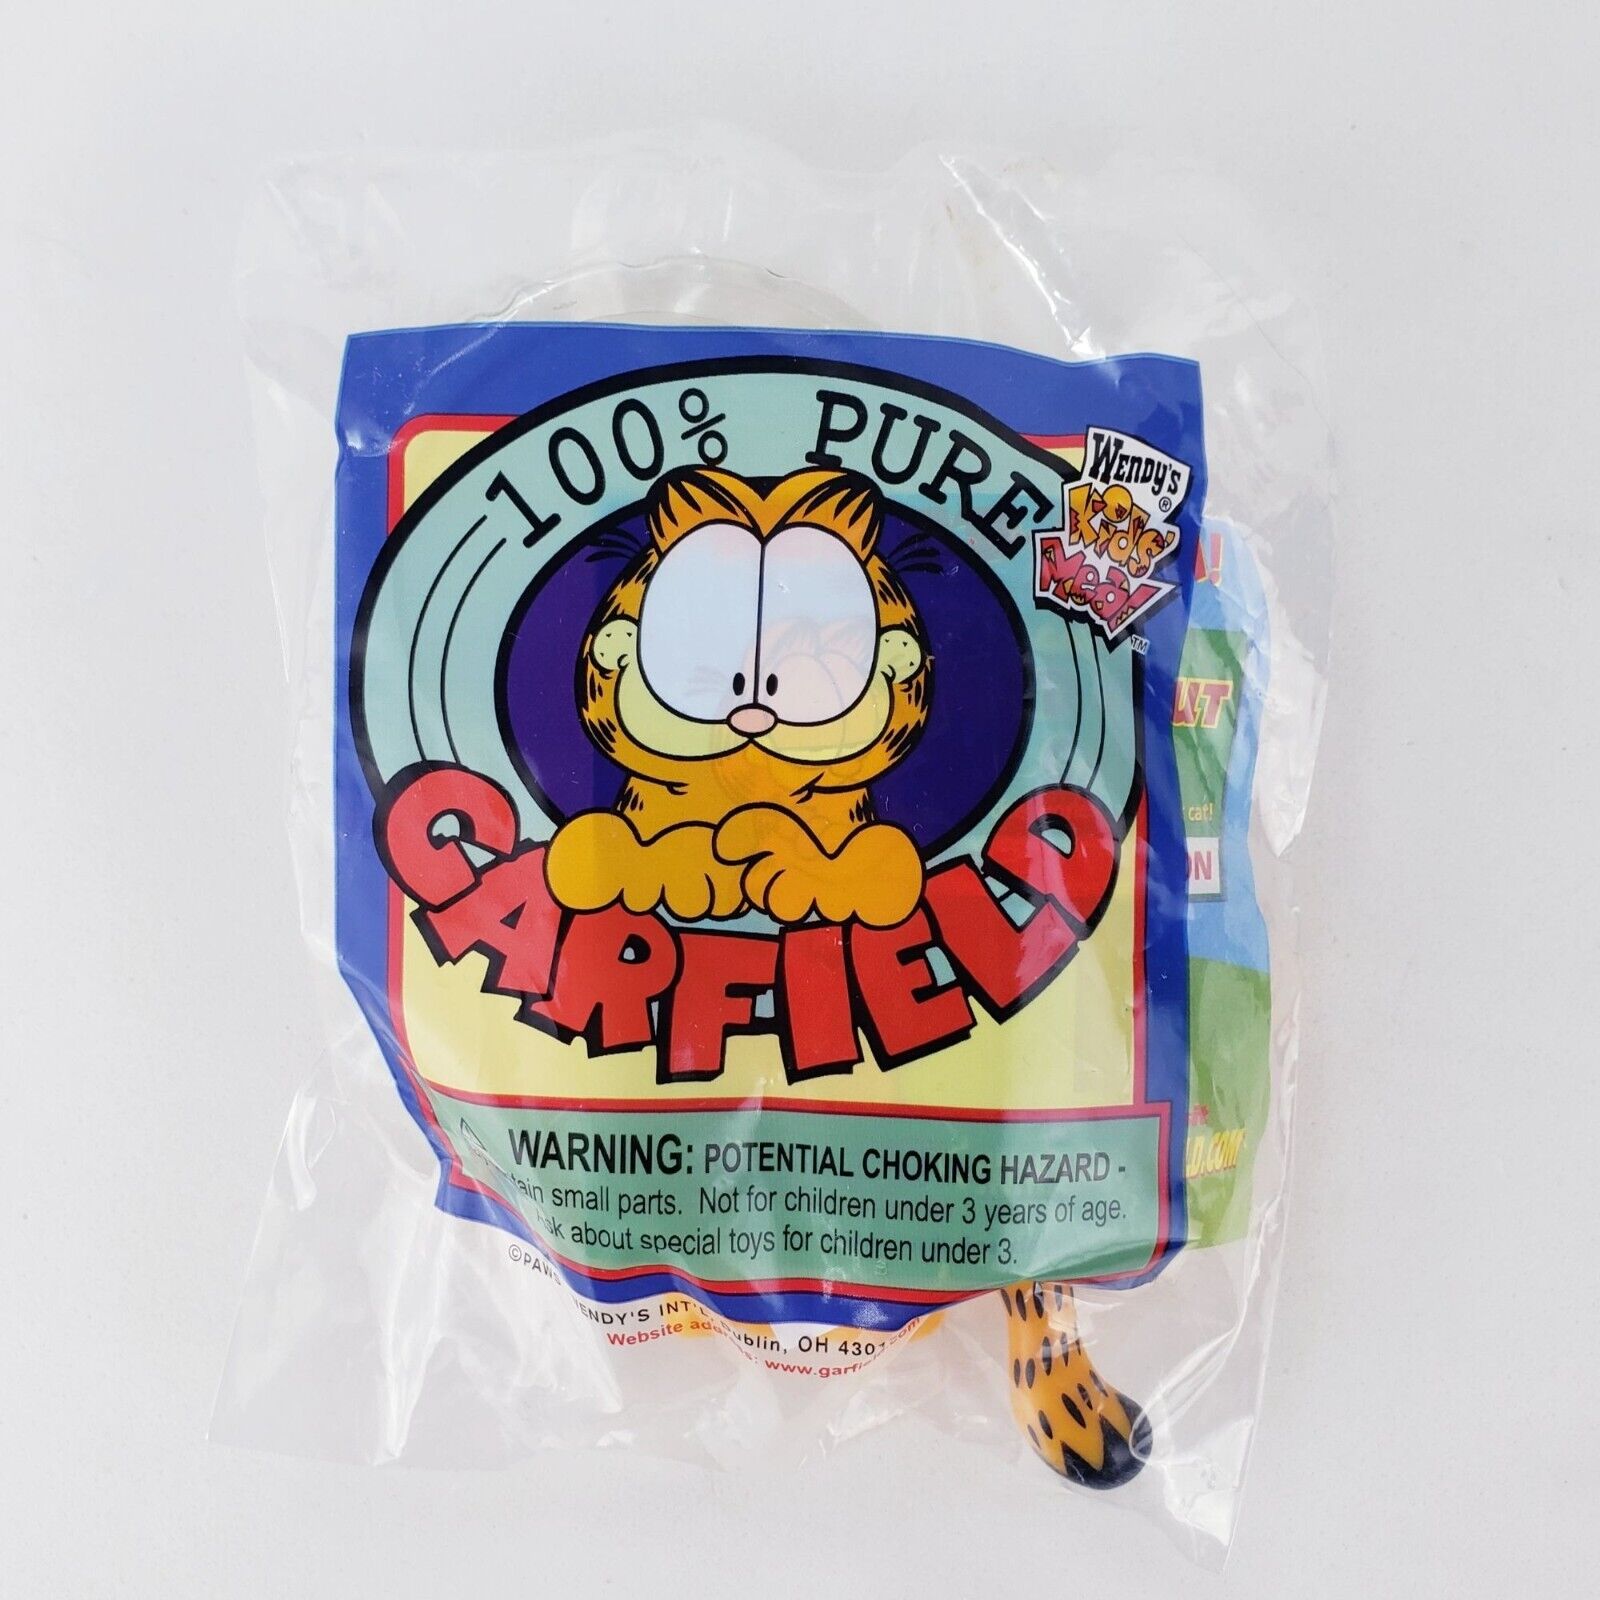 Sealed Vintage 2001 Garfield Suction Cup Pull String Window Climber Wendy's Toy